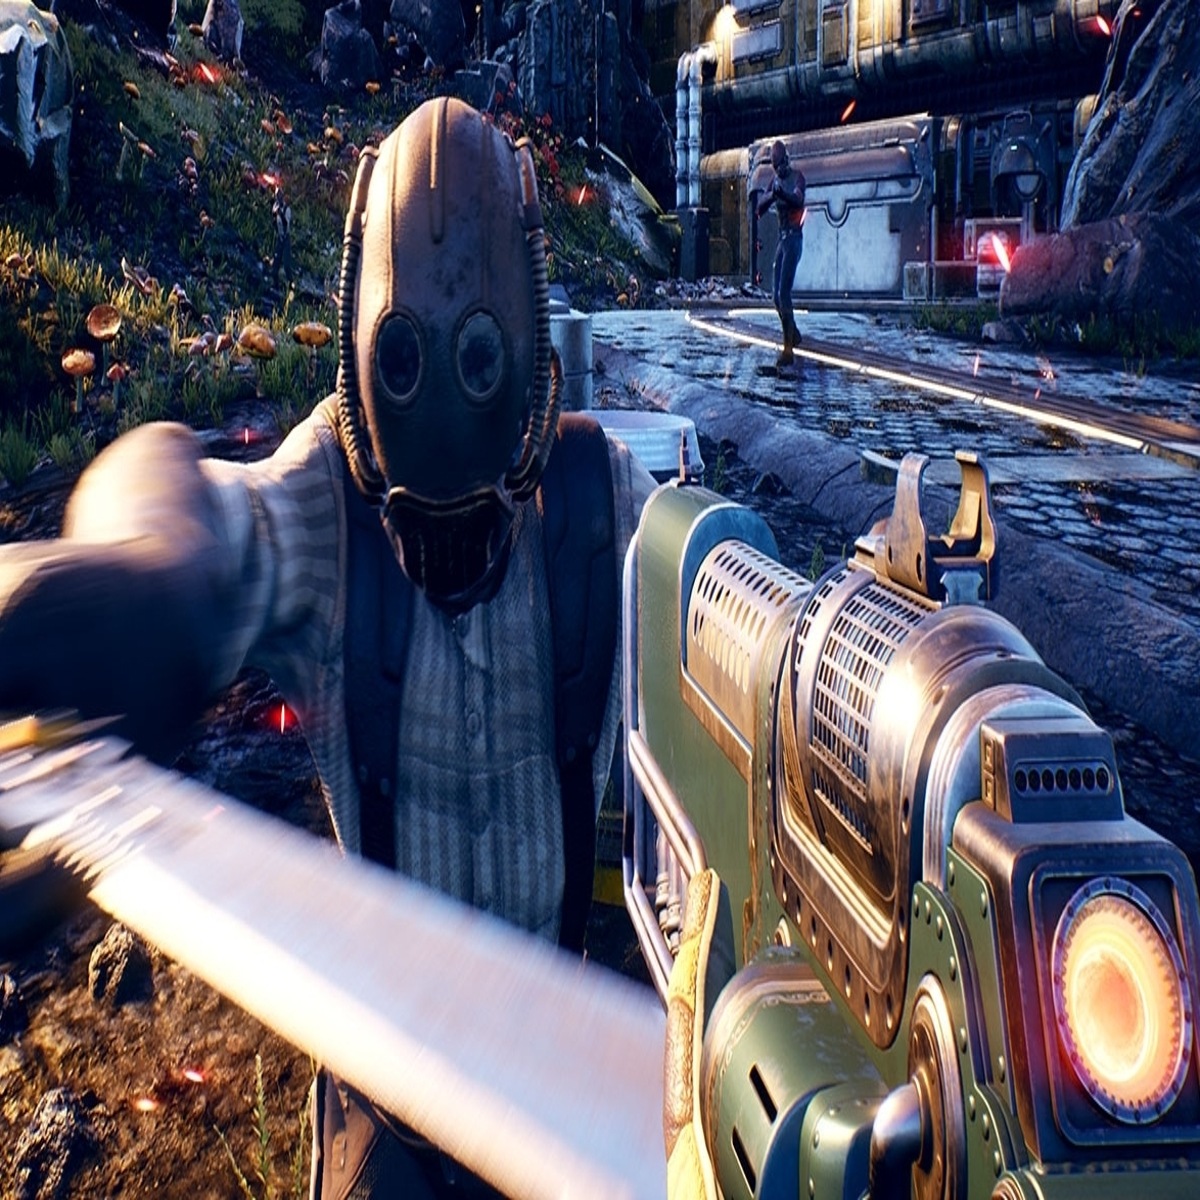 Novo gameplay para The Outer Worlds - Xbox Power